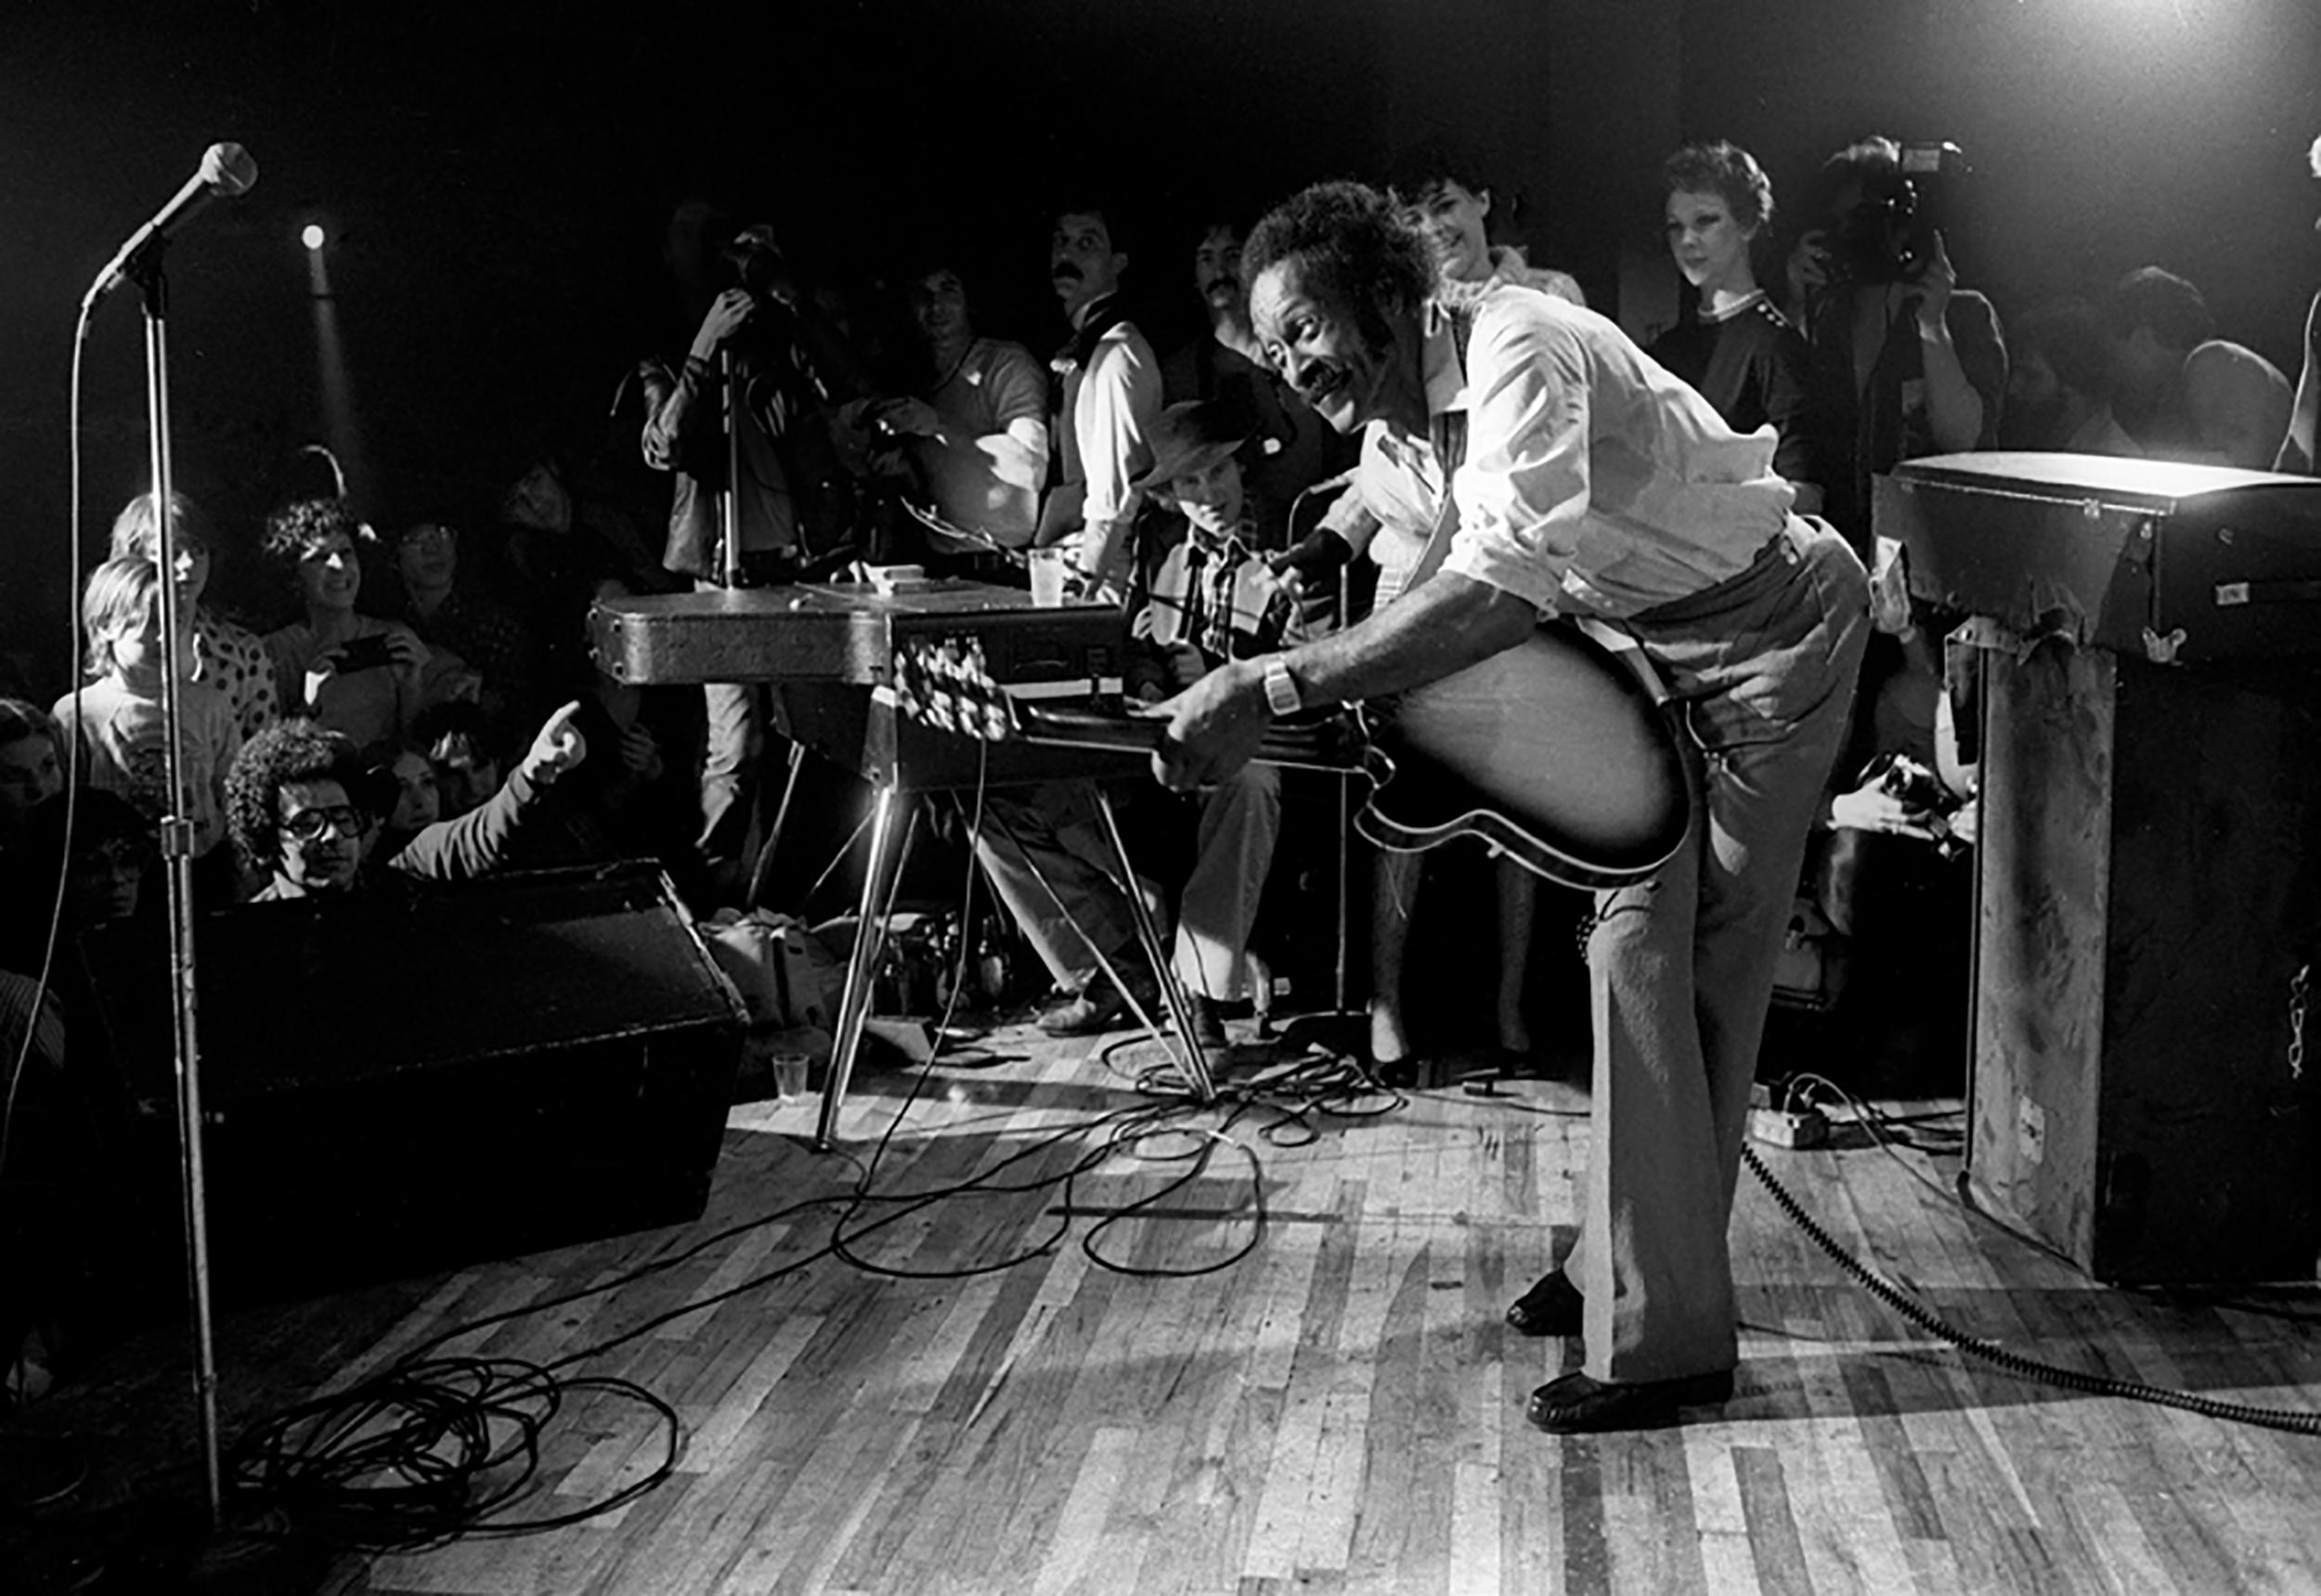 Richard E. Aaron Black and White Photograph - Chuck Berry Playing Guitar to Crowd